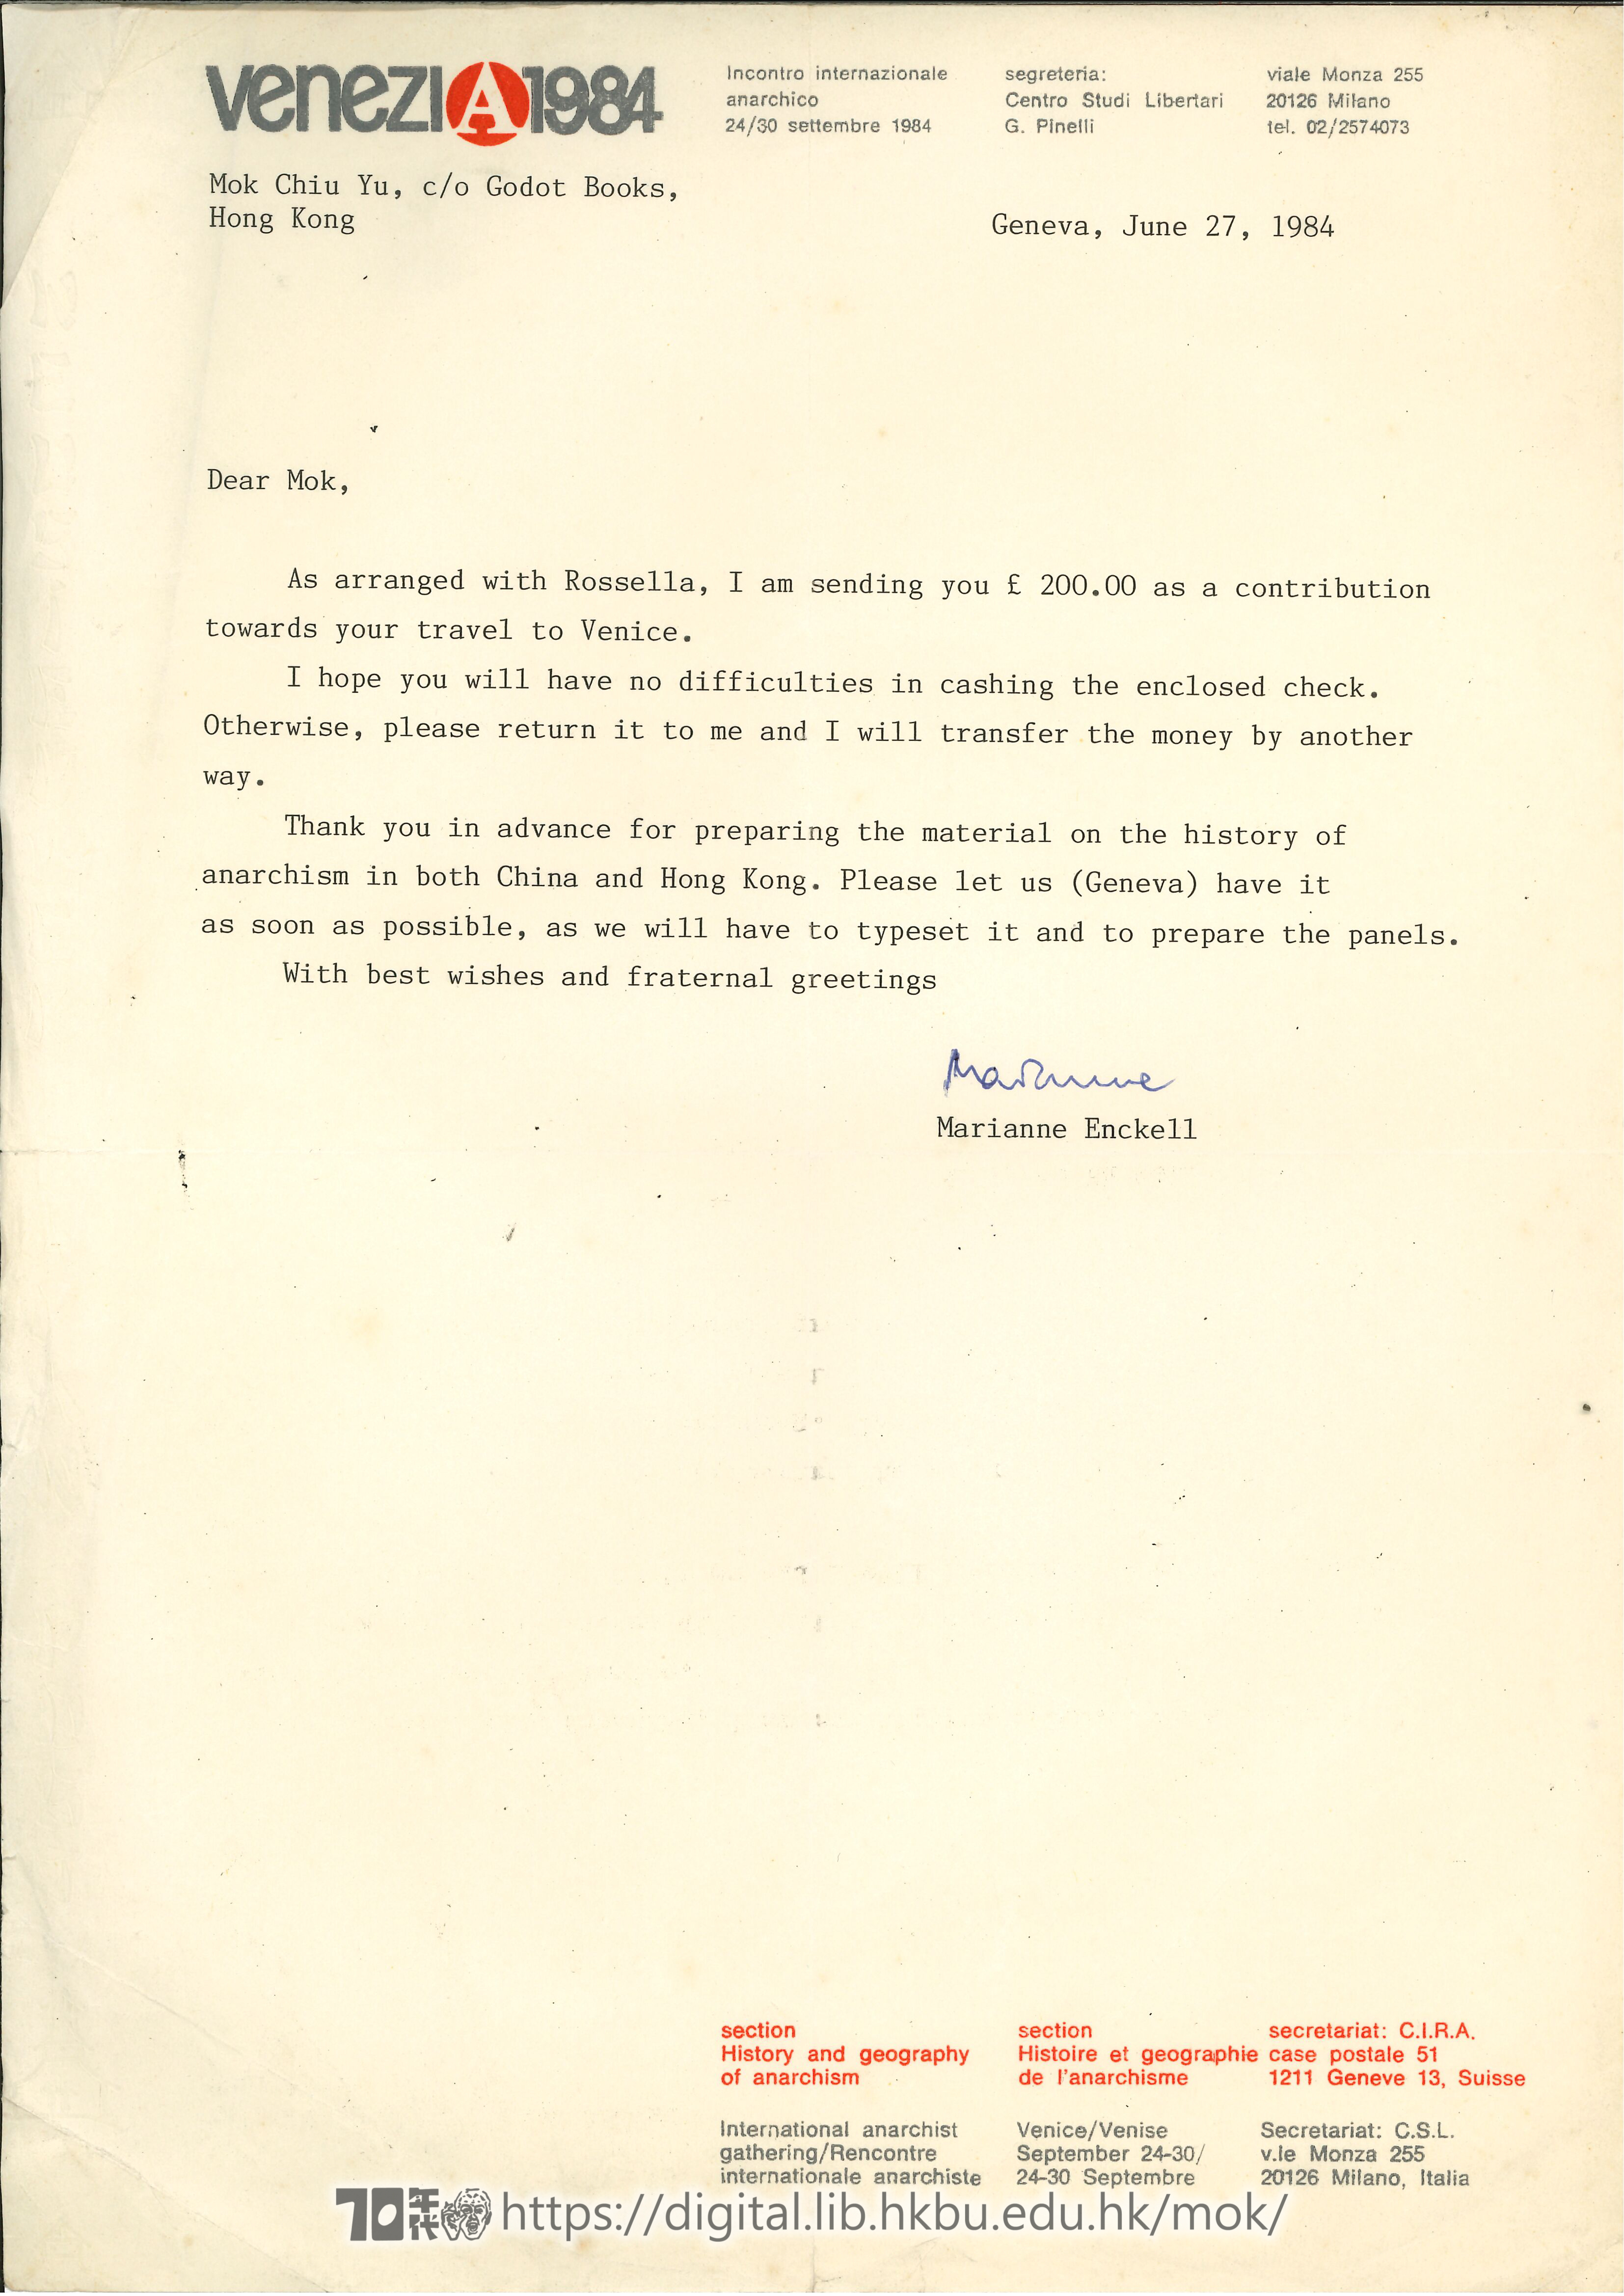   Letter from Marianne Enckell to Mok Chiu-yu  